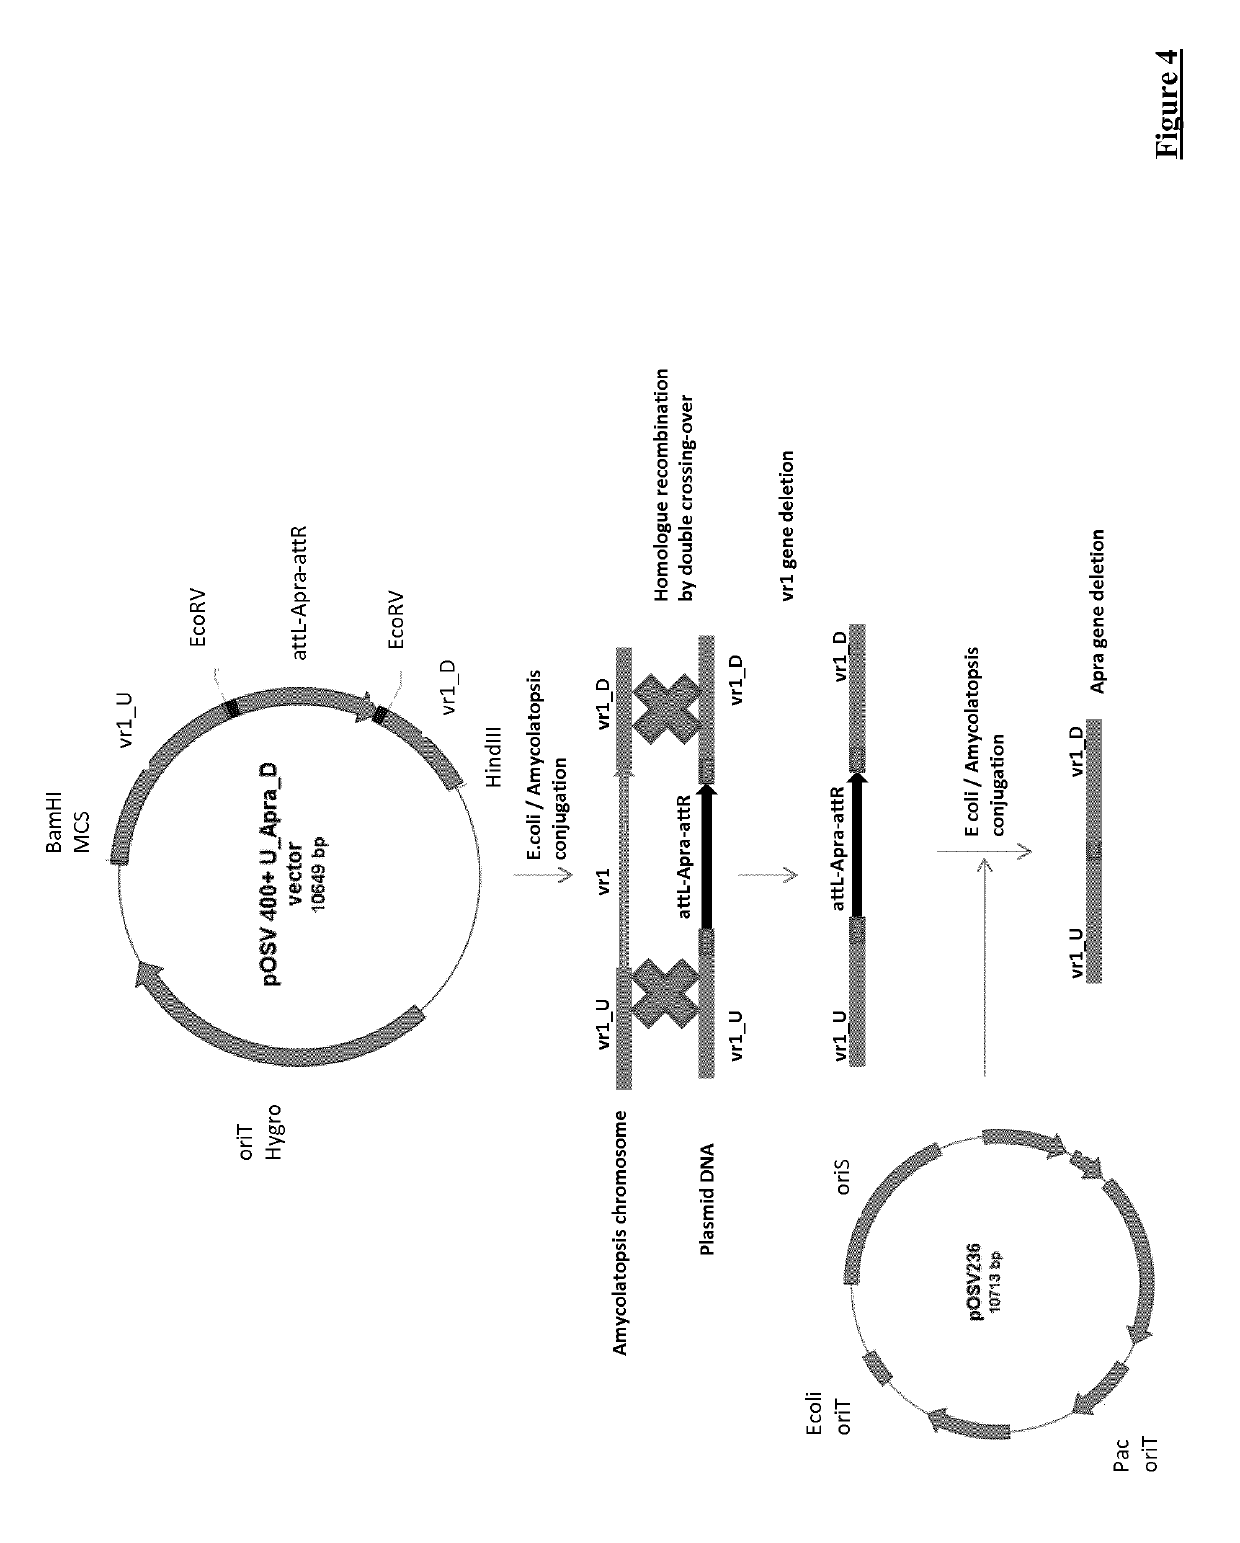 Microorganisms and methods for producing vanillin